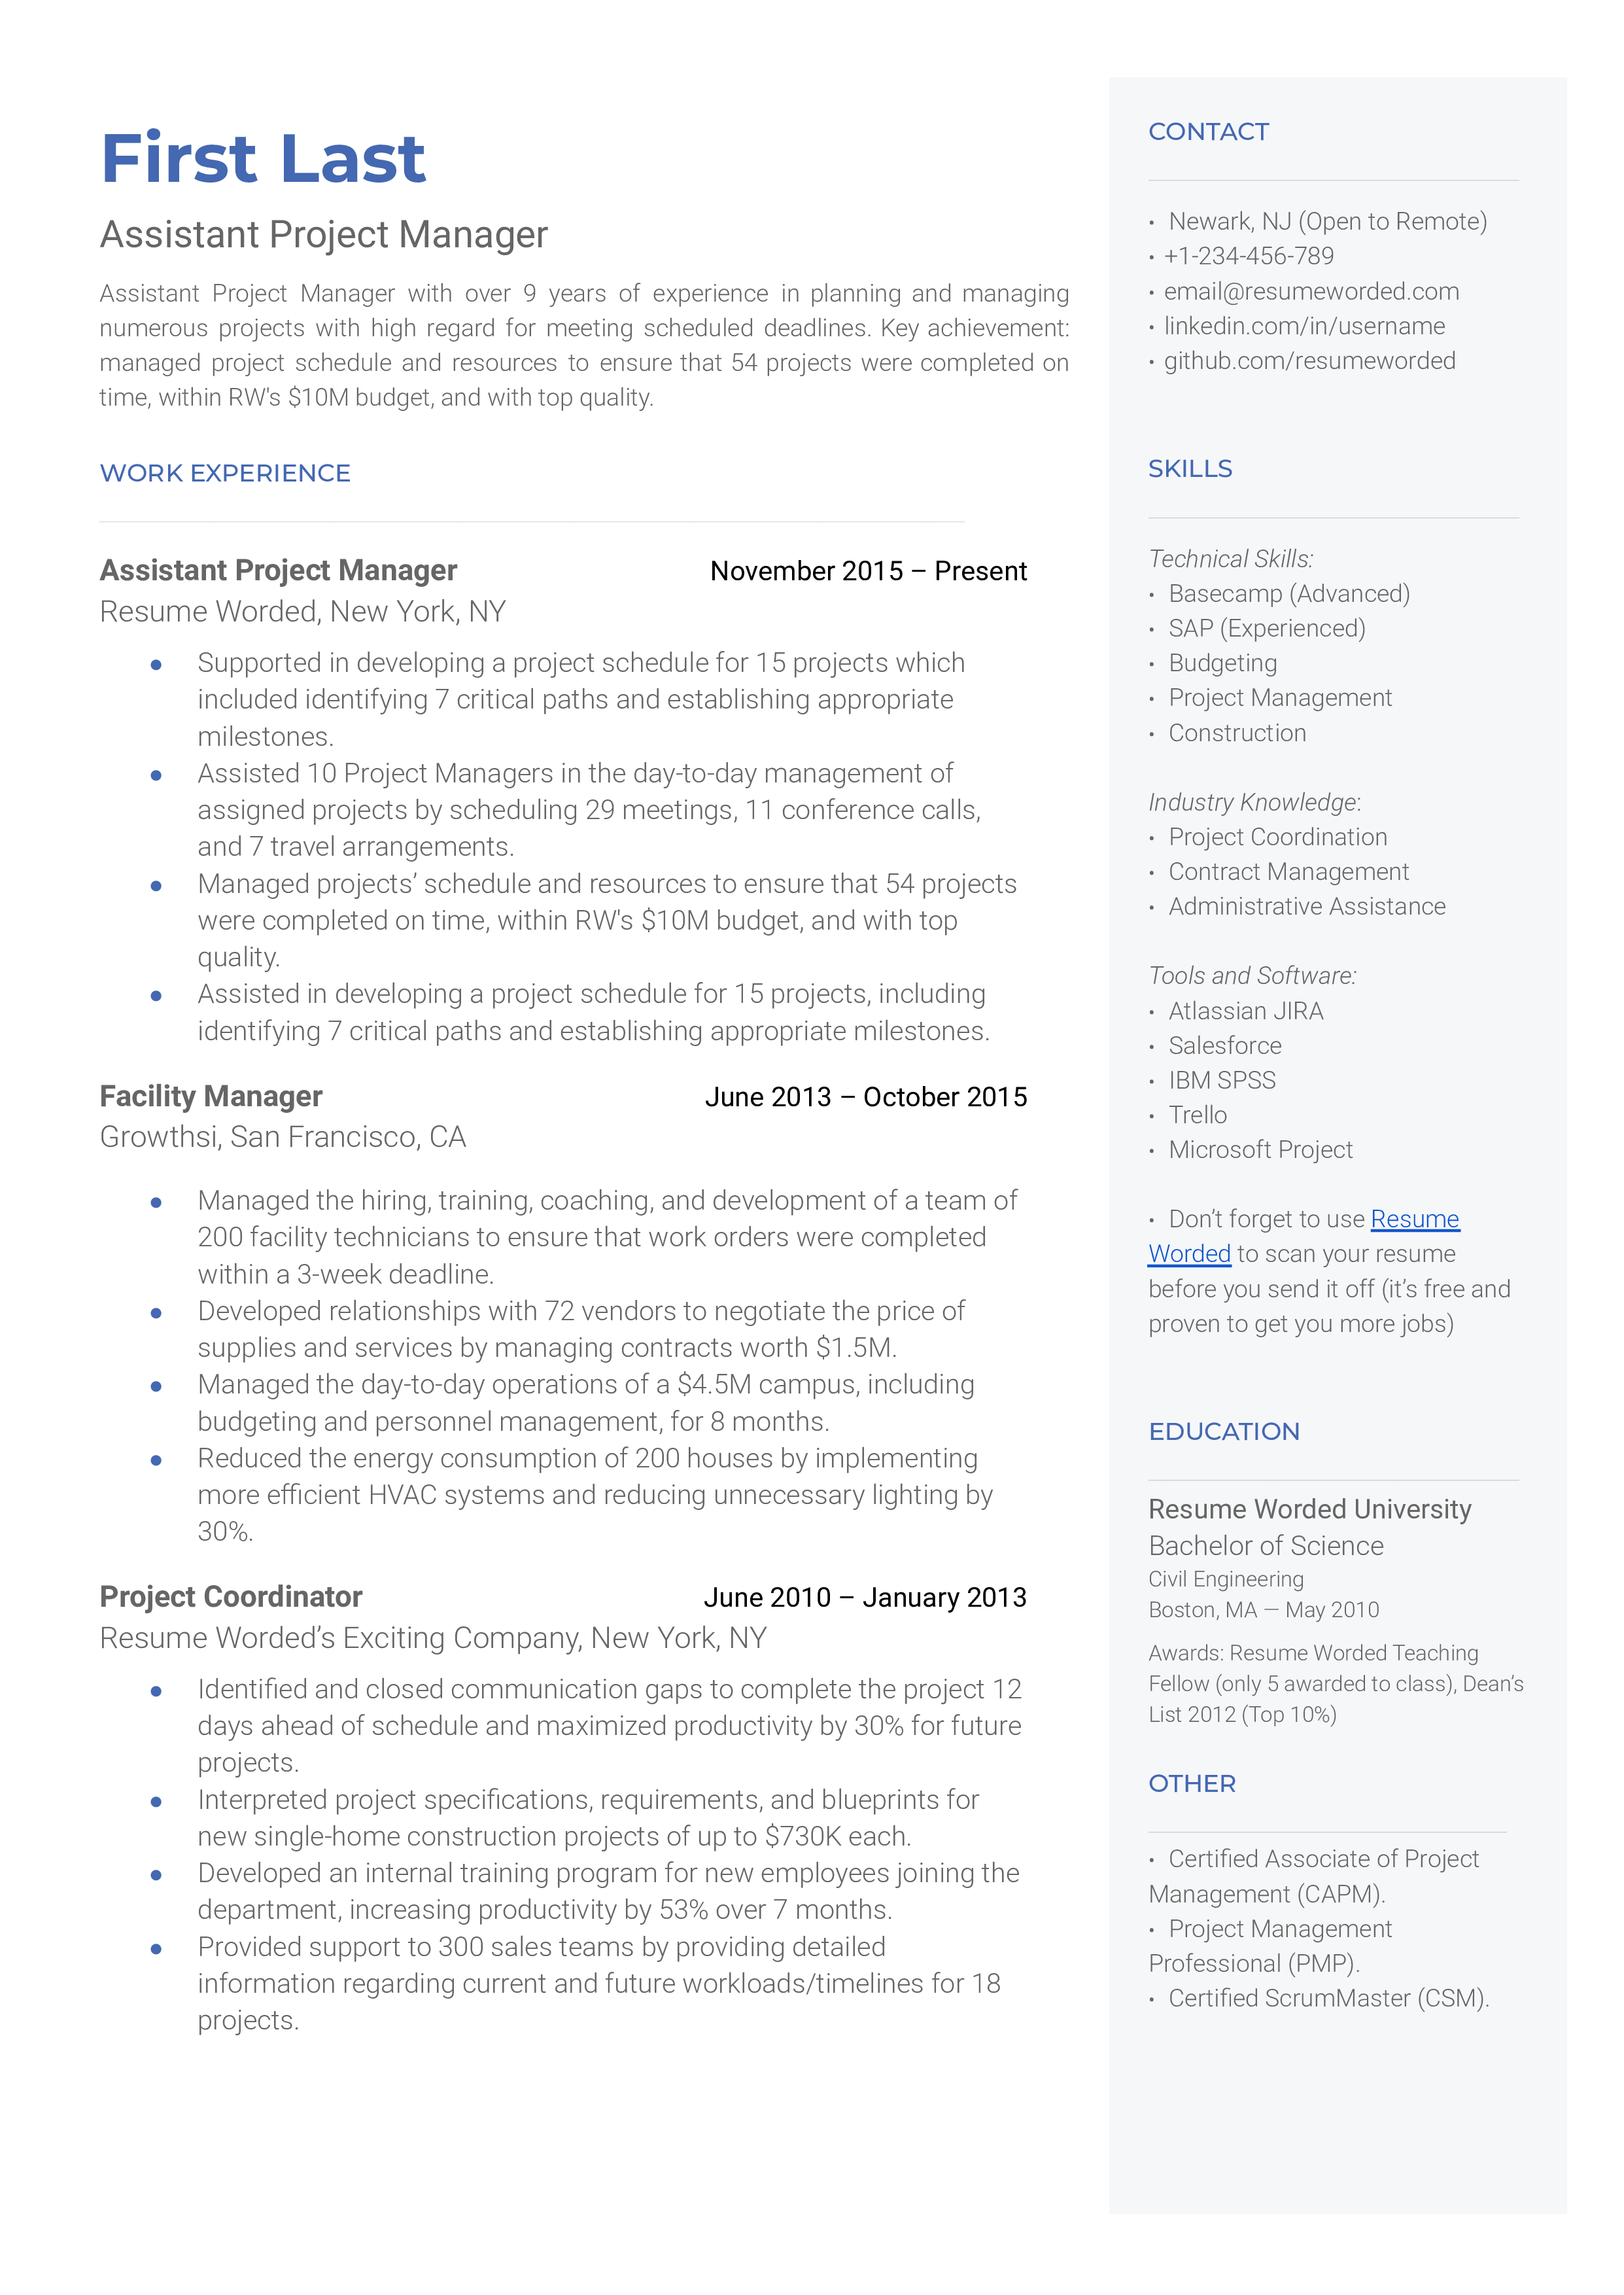 Assistant Project Manager Resume Template + Example